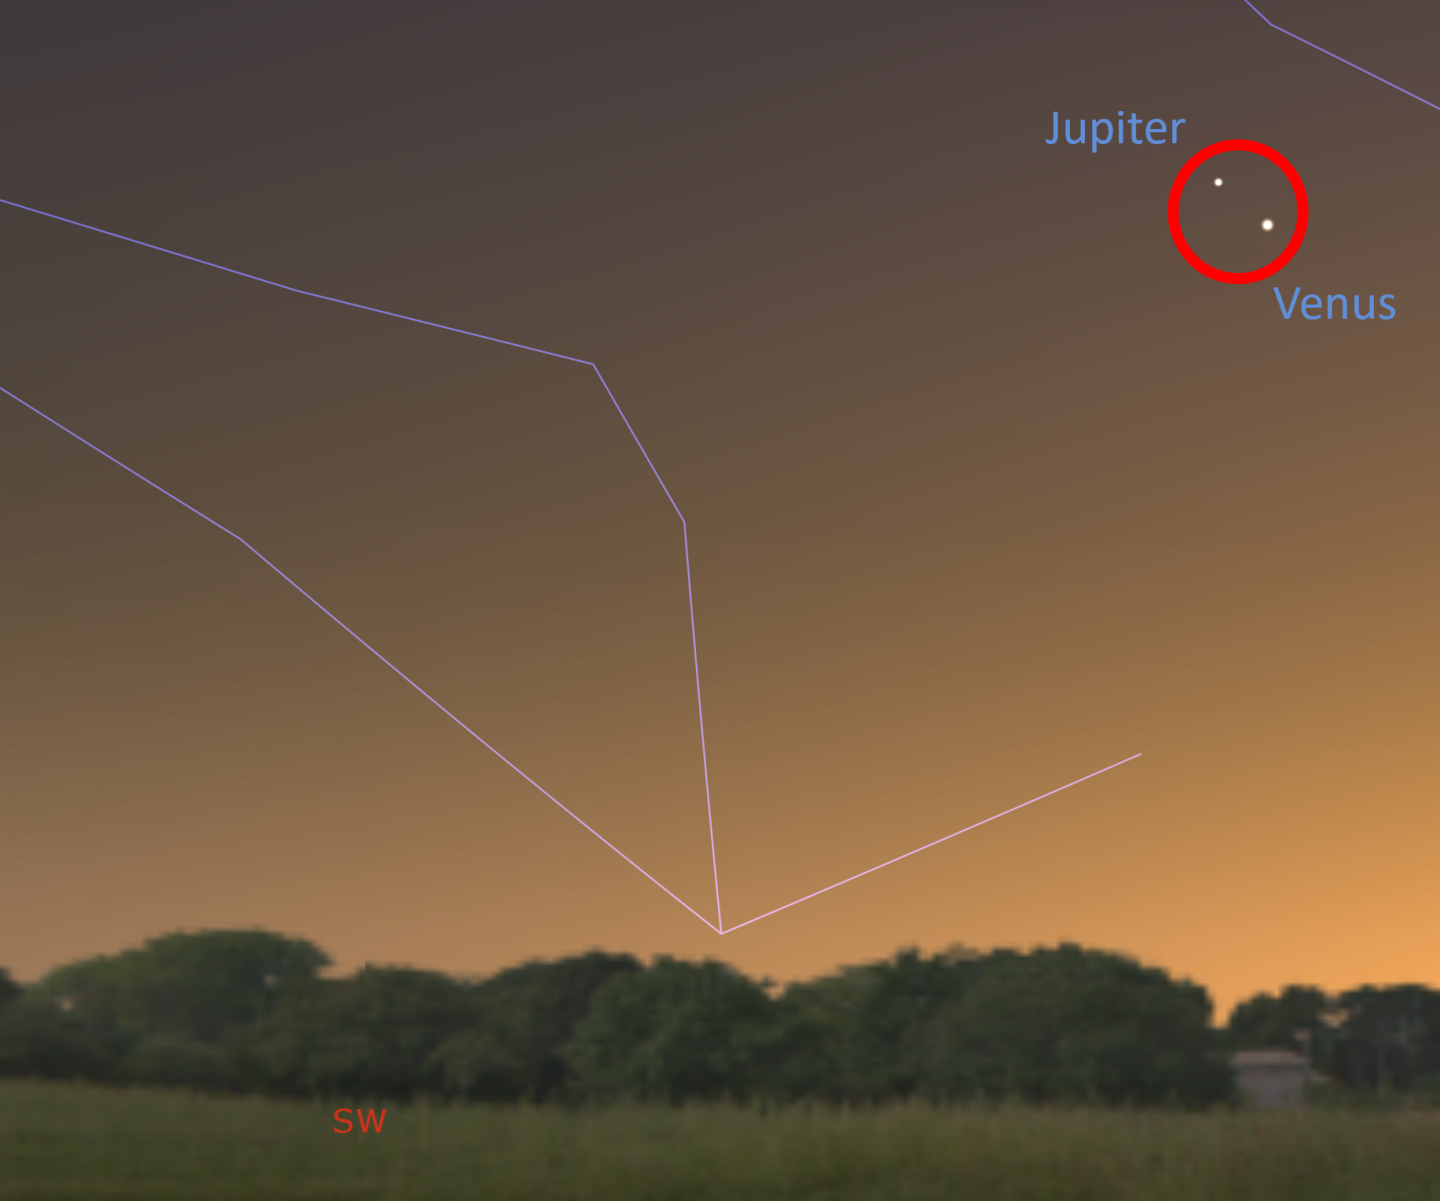 Jupiter and Venus are circled as they appear to be near each other.